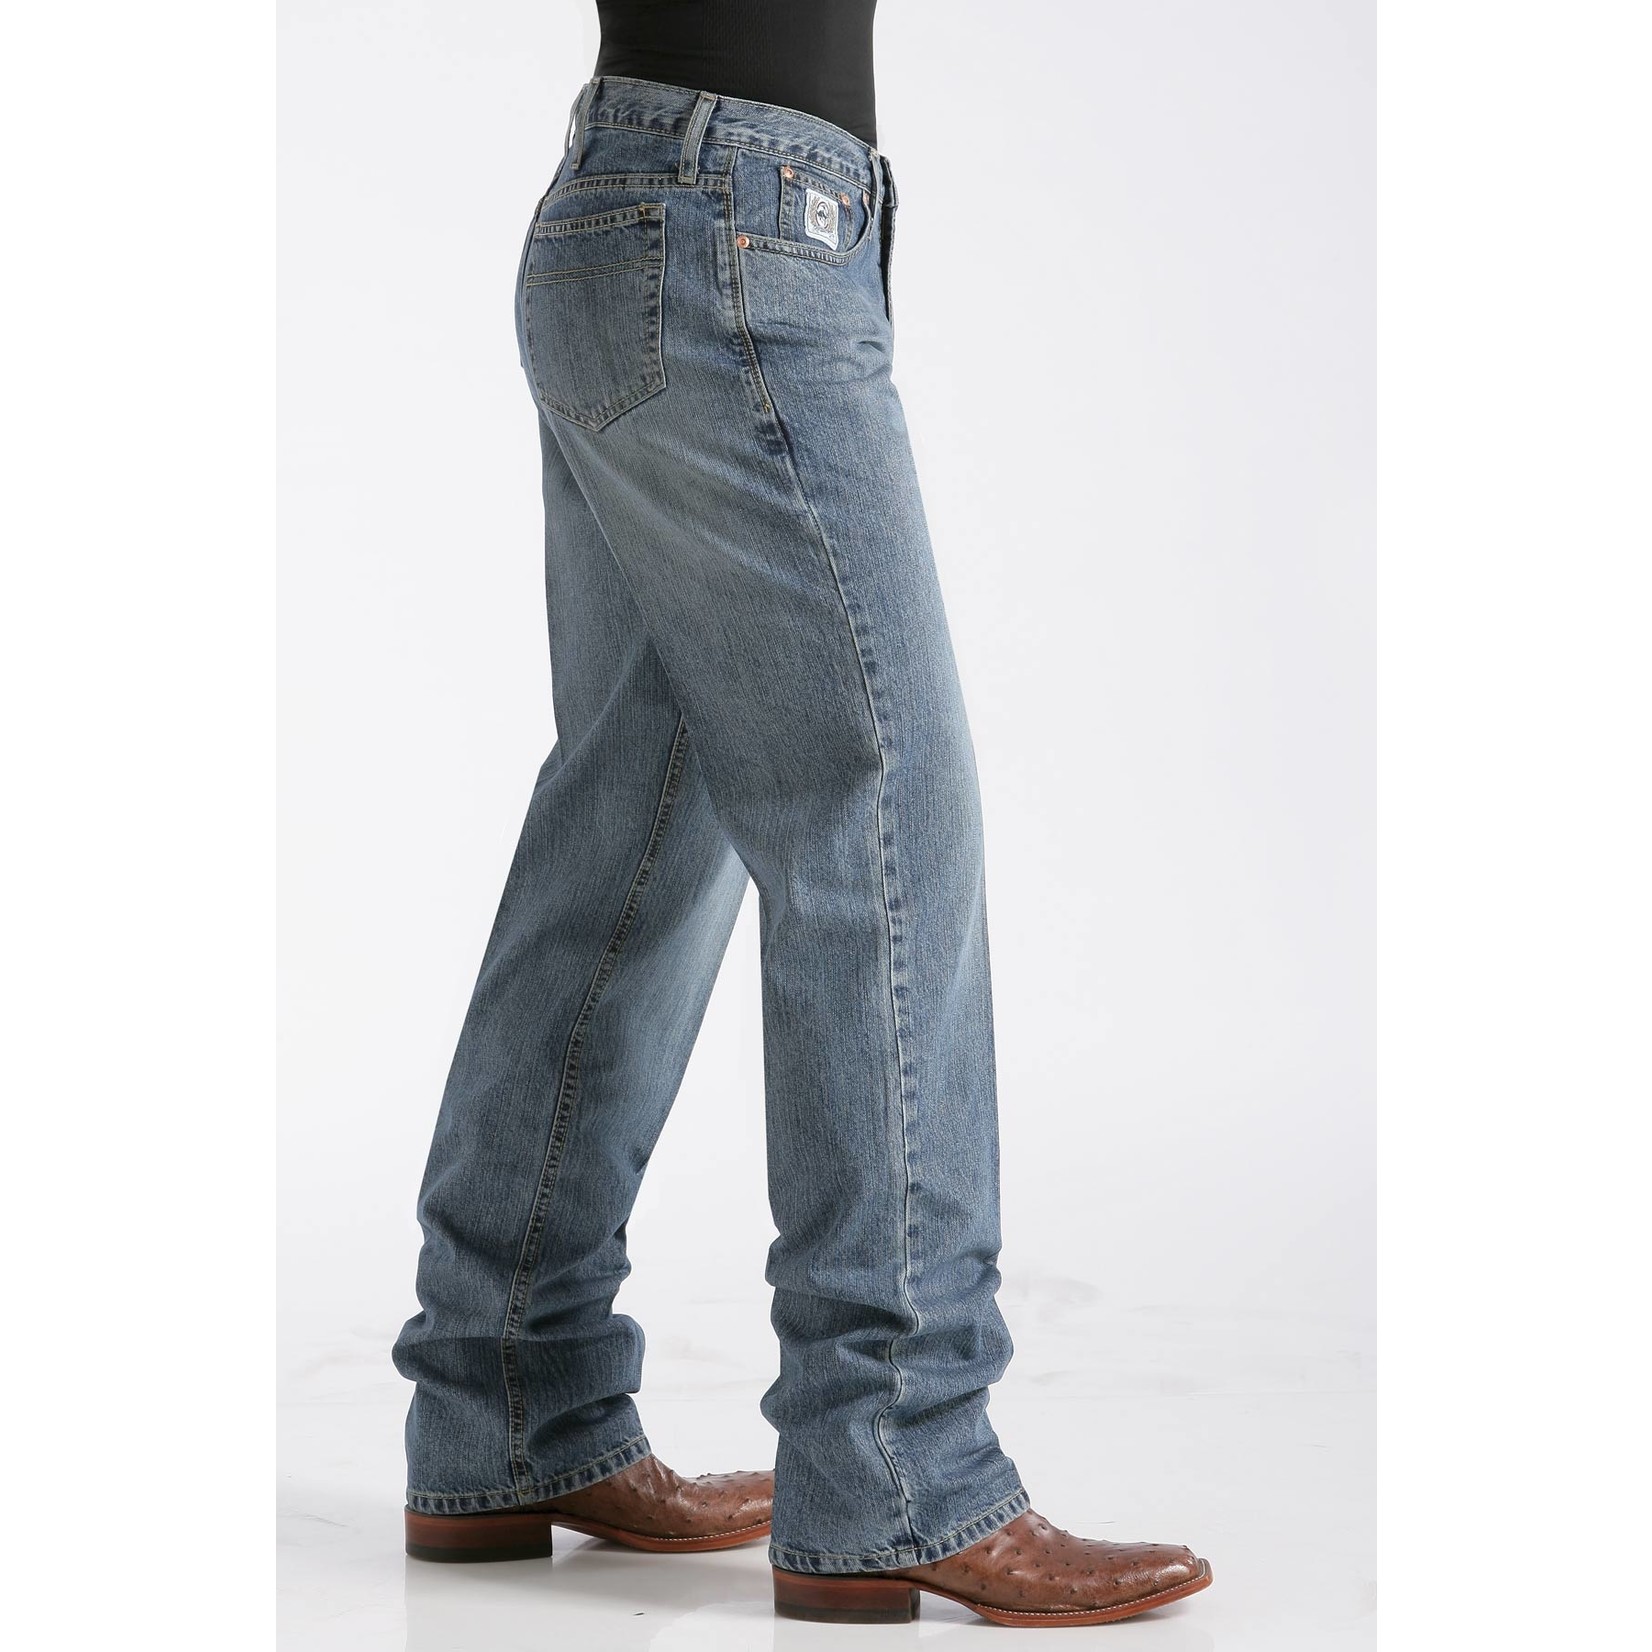 Cinch Cinch MB92834003 Cinch Men's White Label Medium Wash Relaxed Fit Straight Leg Jeans3